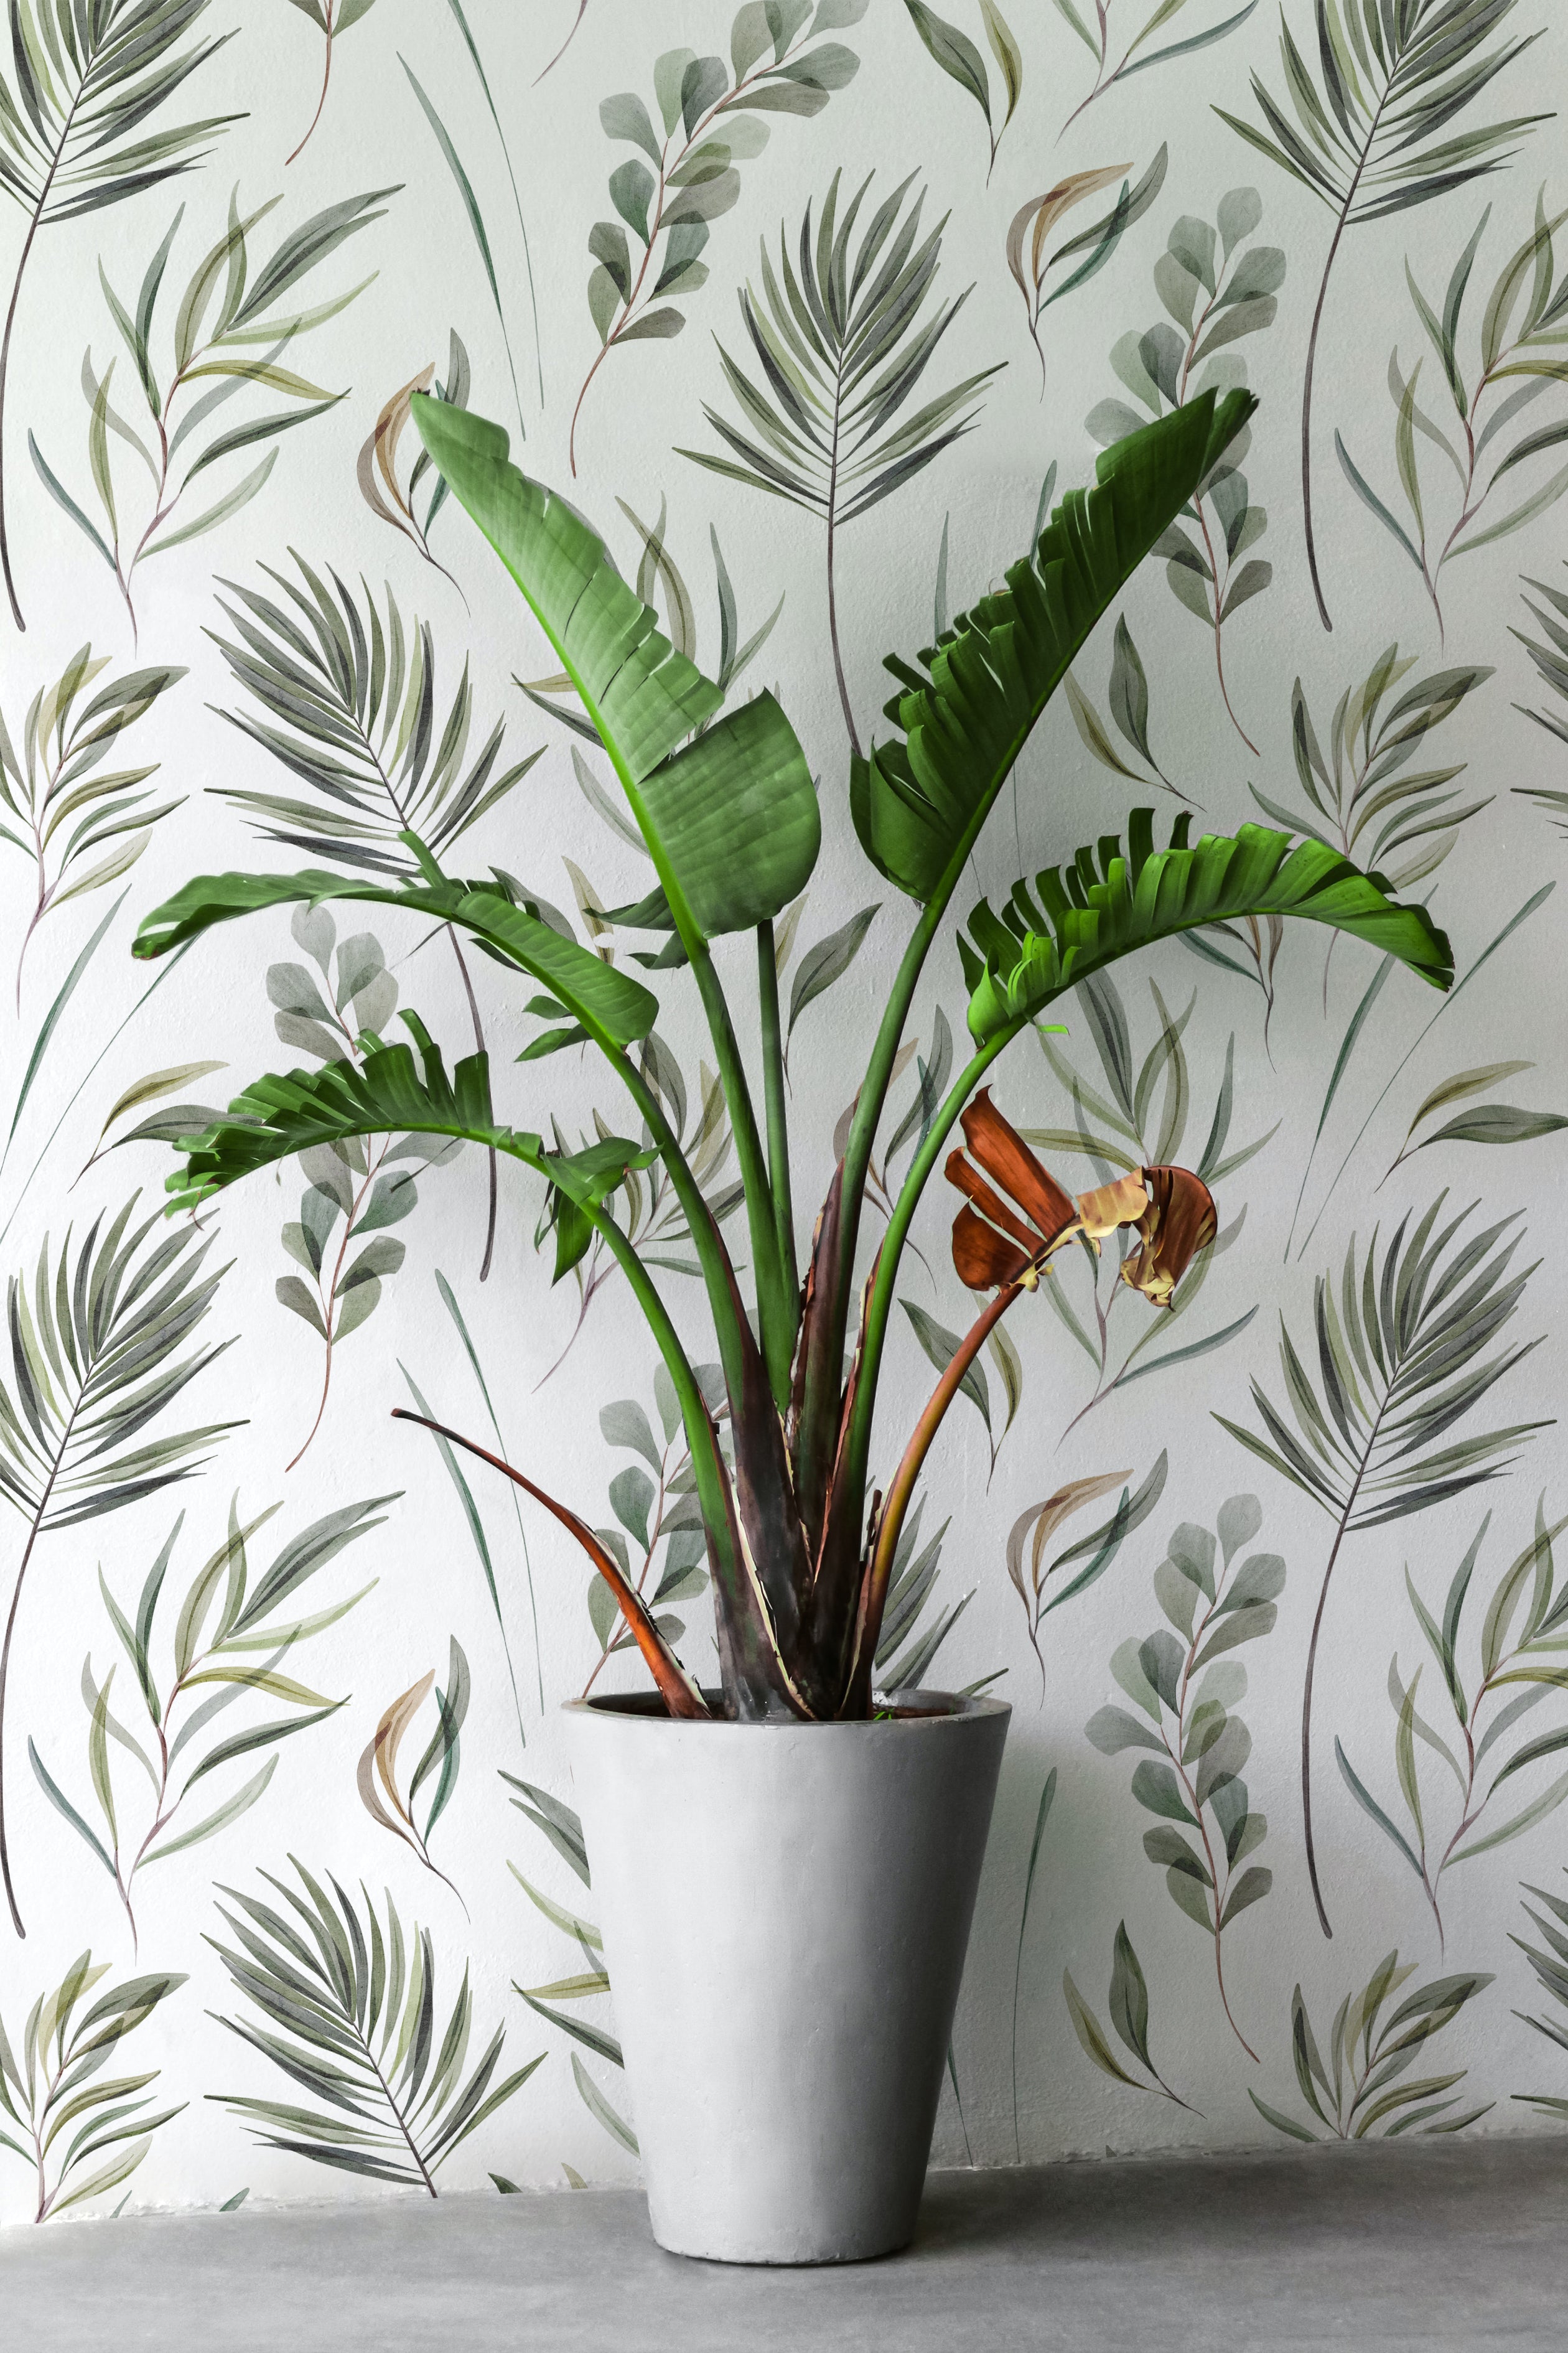 A vibrant indoor plant in a white pot stands against the Green Floral Wallpaper, which features a delicate array of green leaves and fronds, enhancing the fresh and organic atmosphere of the room.